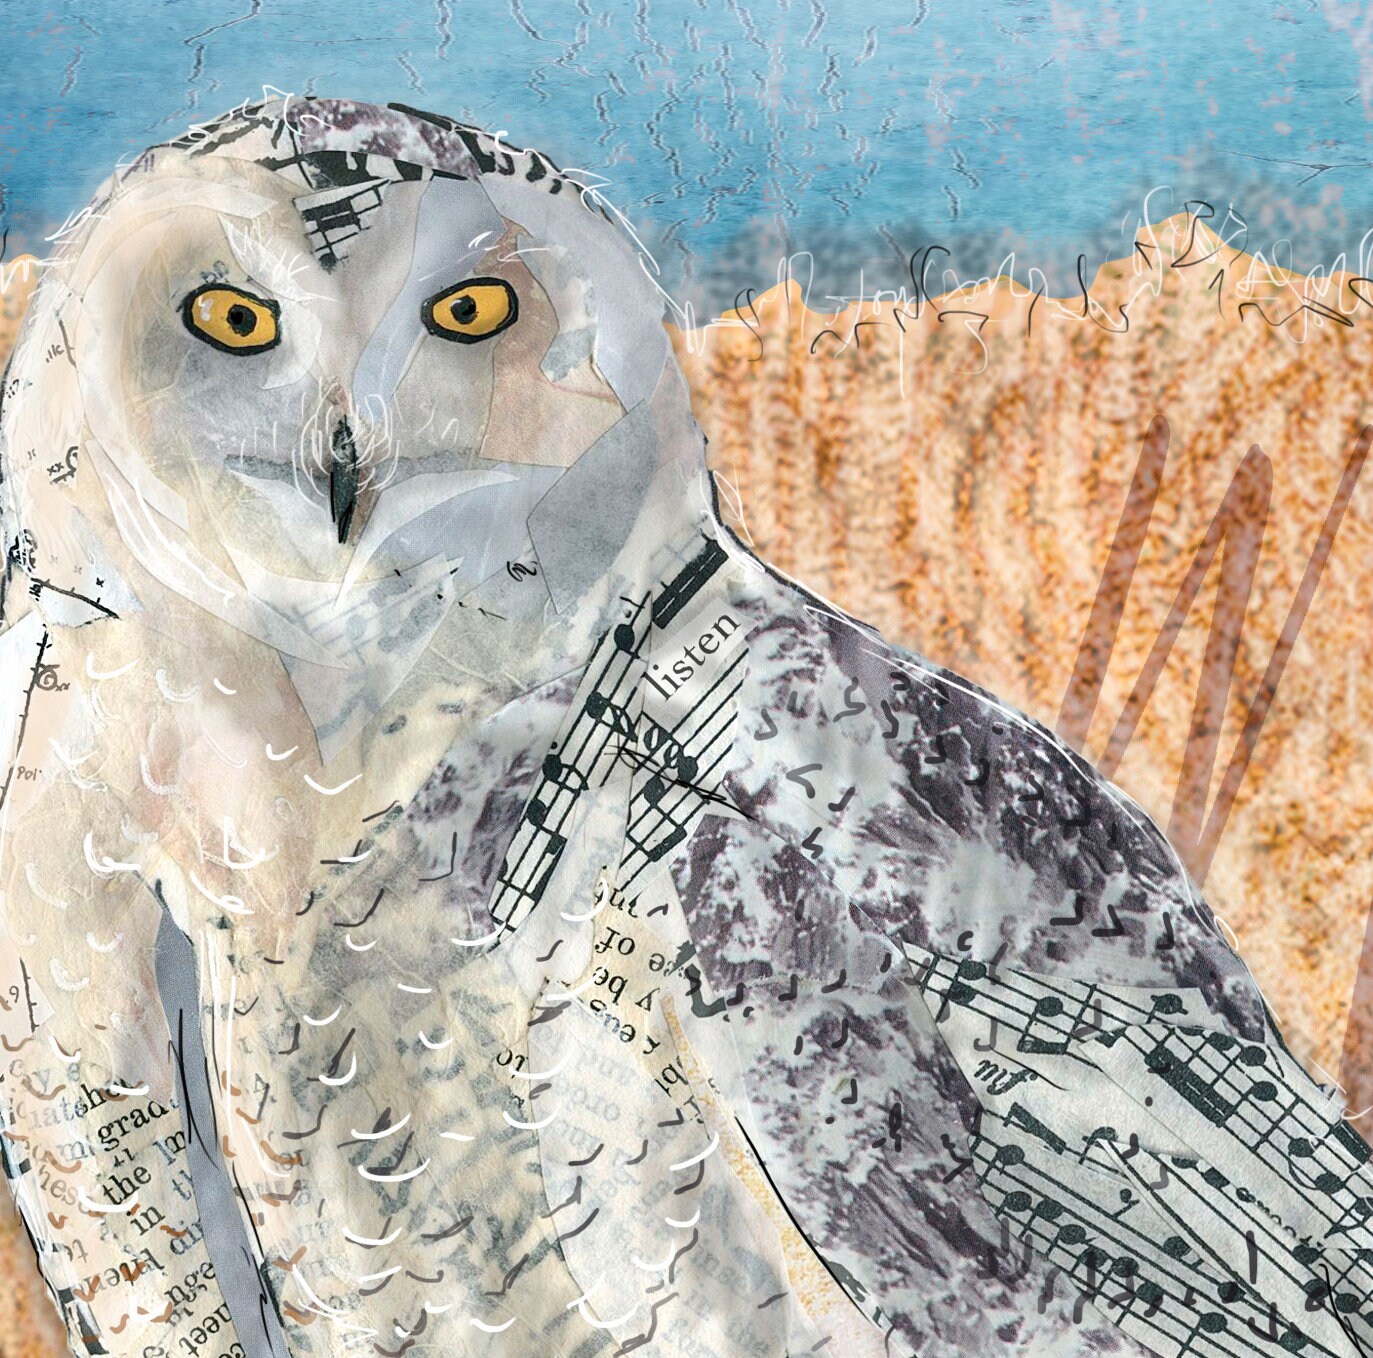 Greeting Card of mixed media collage of a Snowy Owl perched on a fence post with birdwatcher in background - Blank Inside